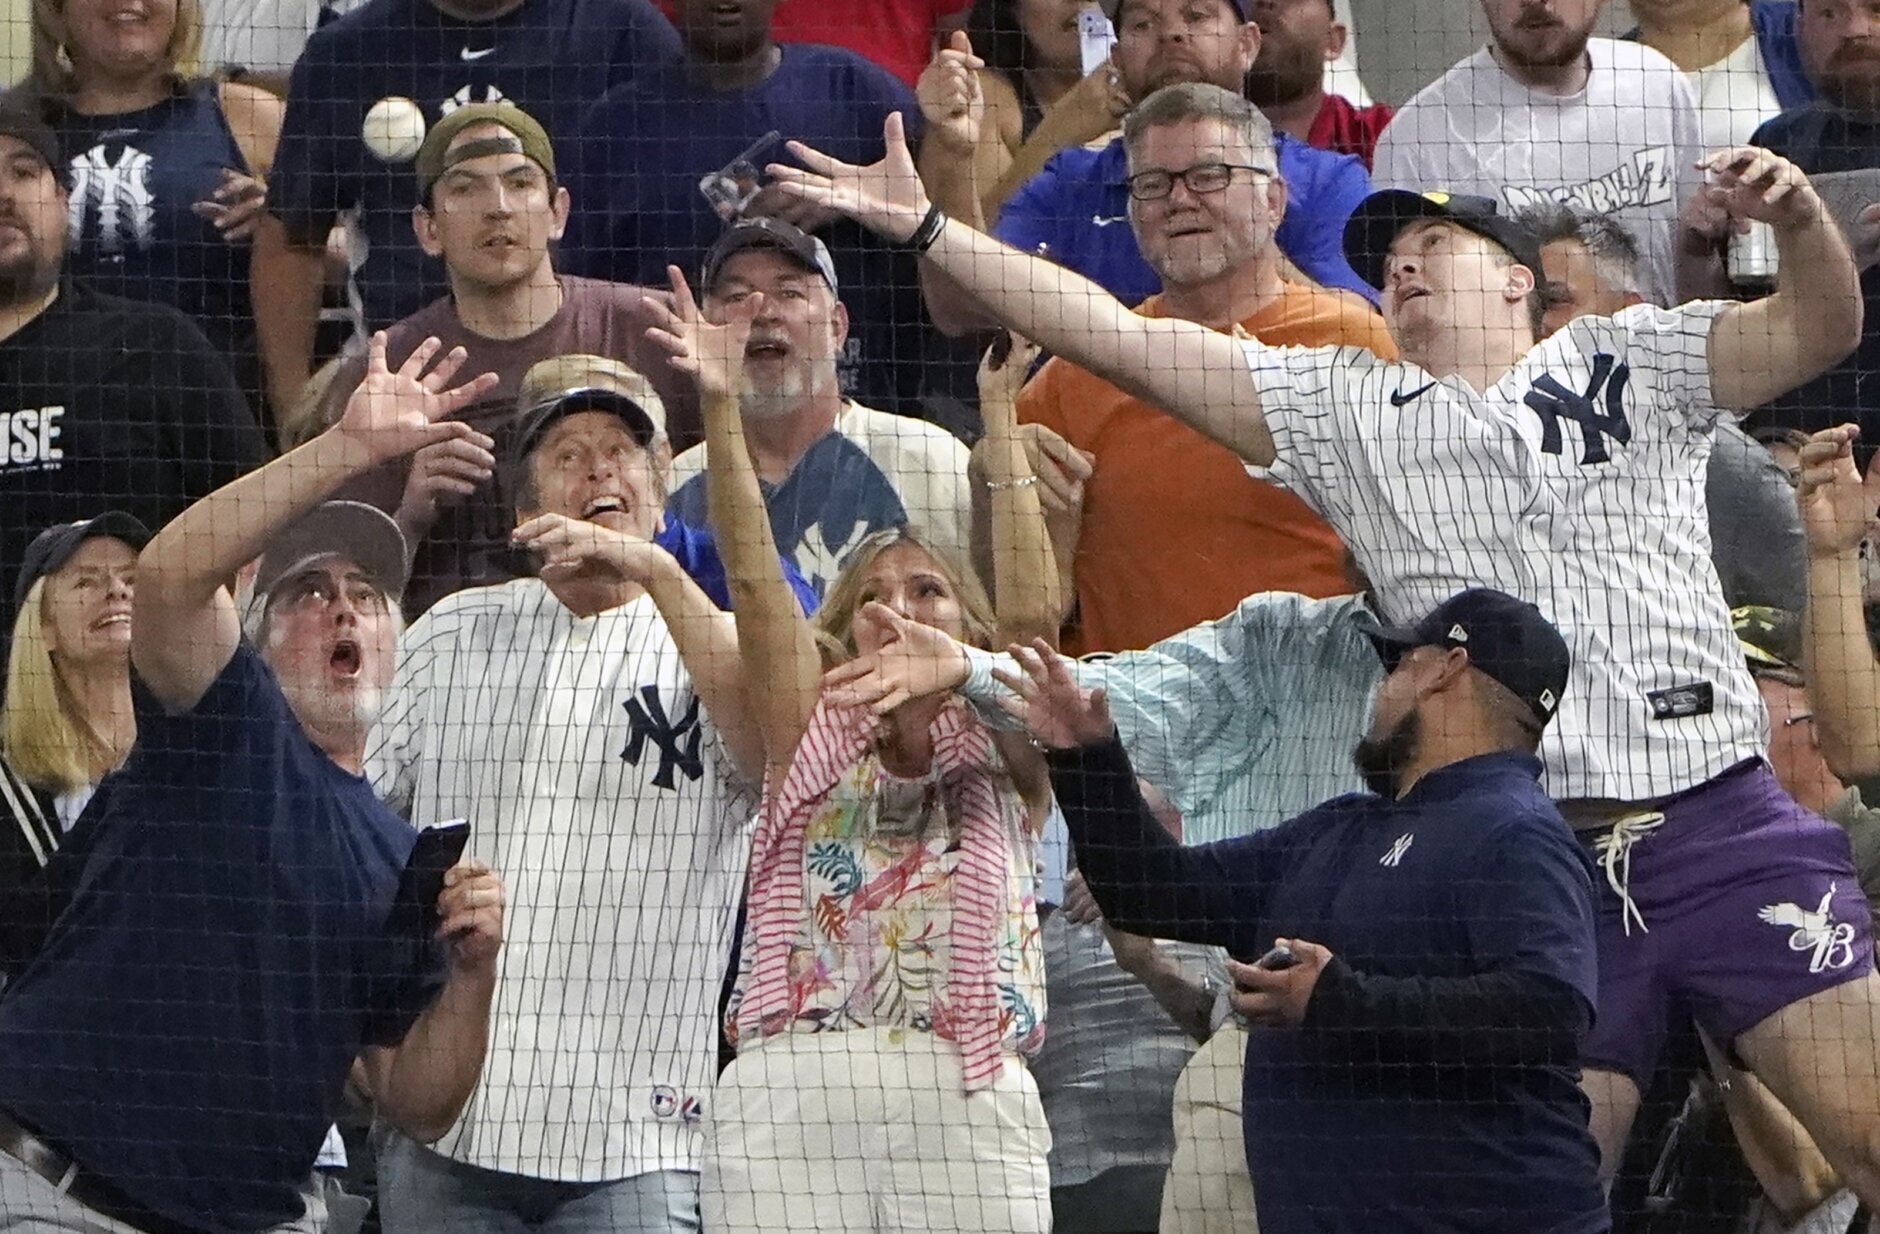 Fans reach for a foul ball by New York Yankees' Aaron Judge during the second inning in the second baseball game of a doubleheader against the Texas Rangers in Arlington, Texas, Tuesday, Oct. 4, 2022. (AP Photo/LM Otero)